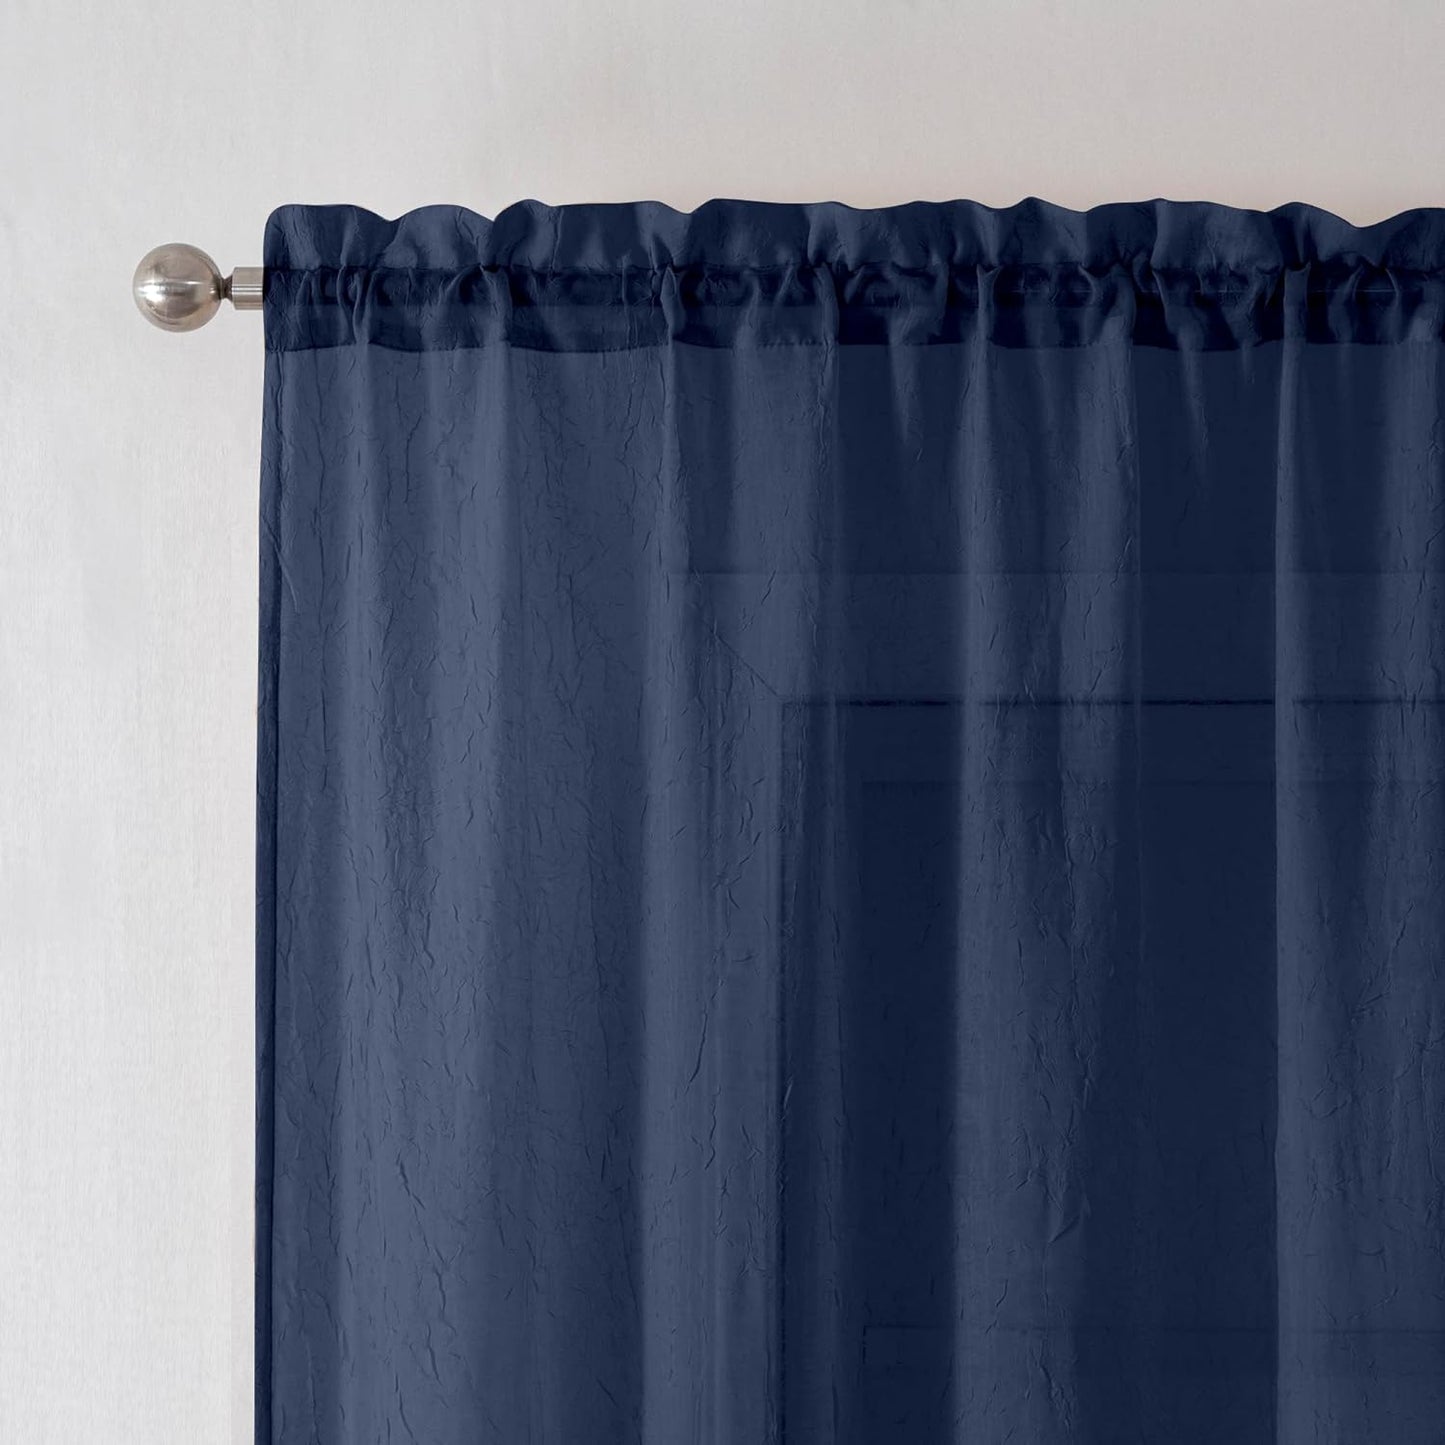 Chyhomenyc Crushed White Sheer Valances for Window 14 Inch Length 2 PCS, Crinkle Voile Short Kitchen Curtains with Dual Rod Pockets，Gauzy Bedroom Curtain Valance，Each 42Wx14L Inches  Chyhomenyc Navy Blue 42 W X 84 L 